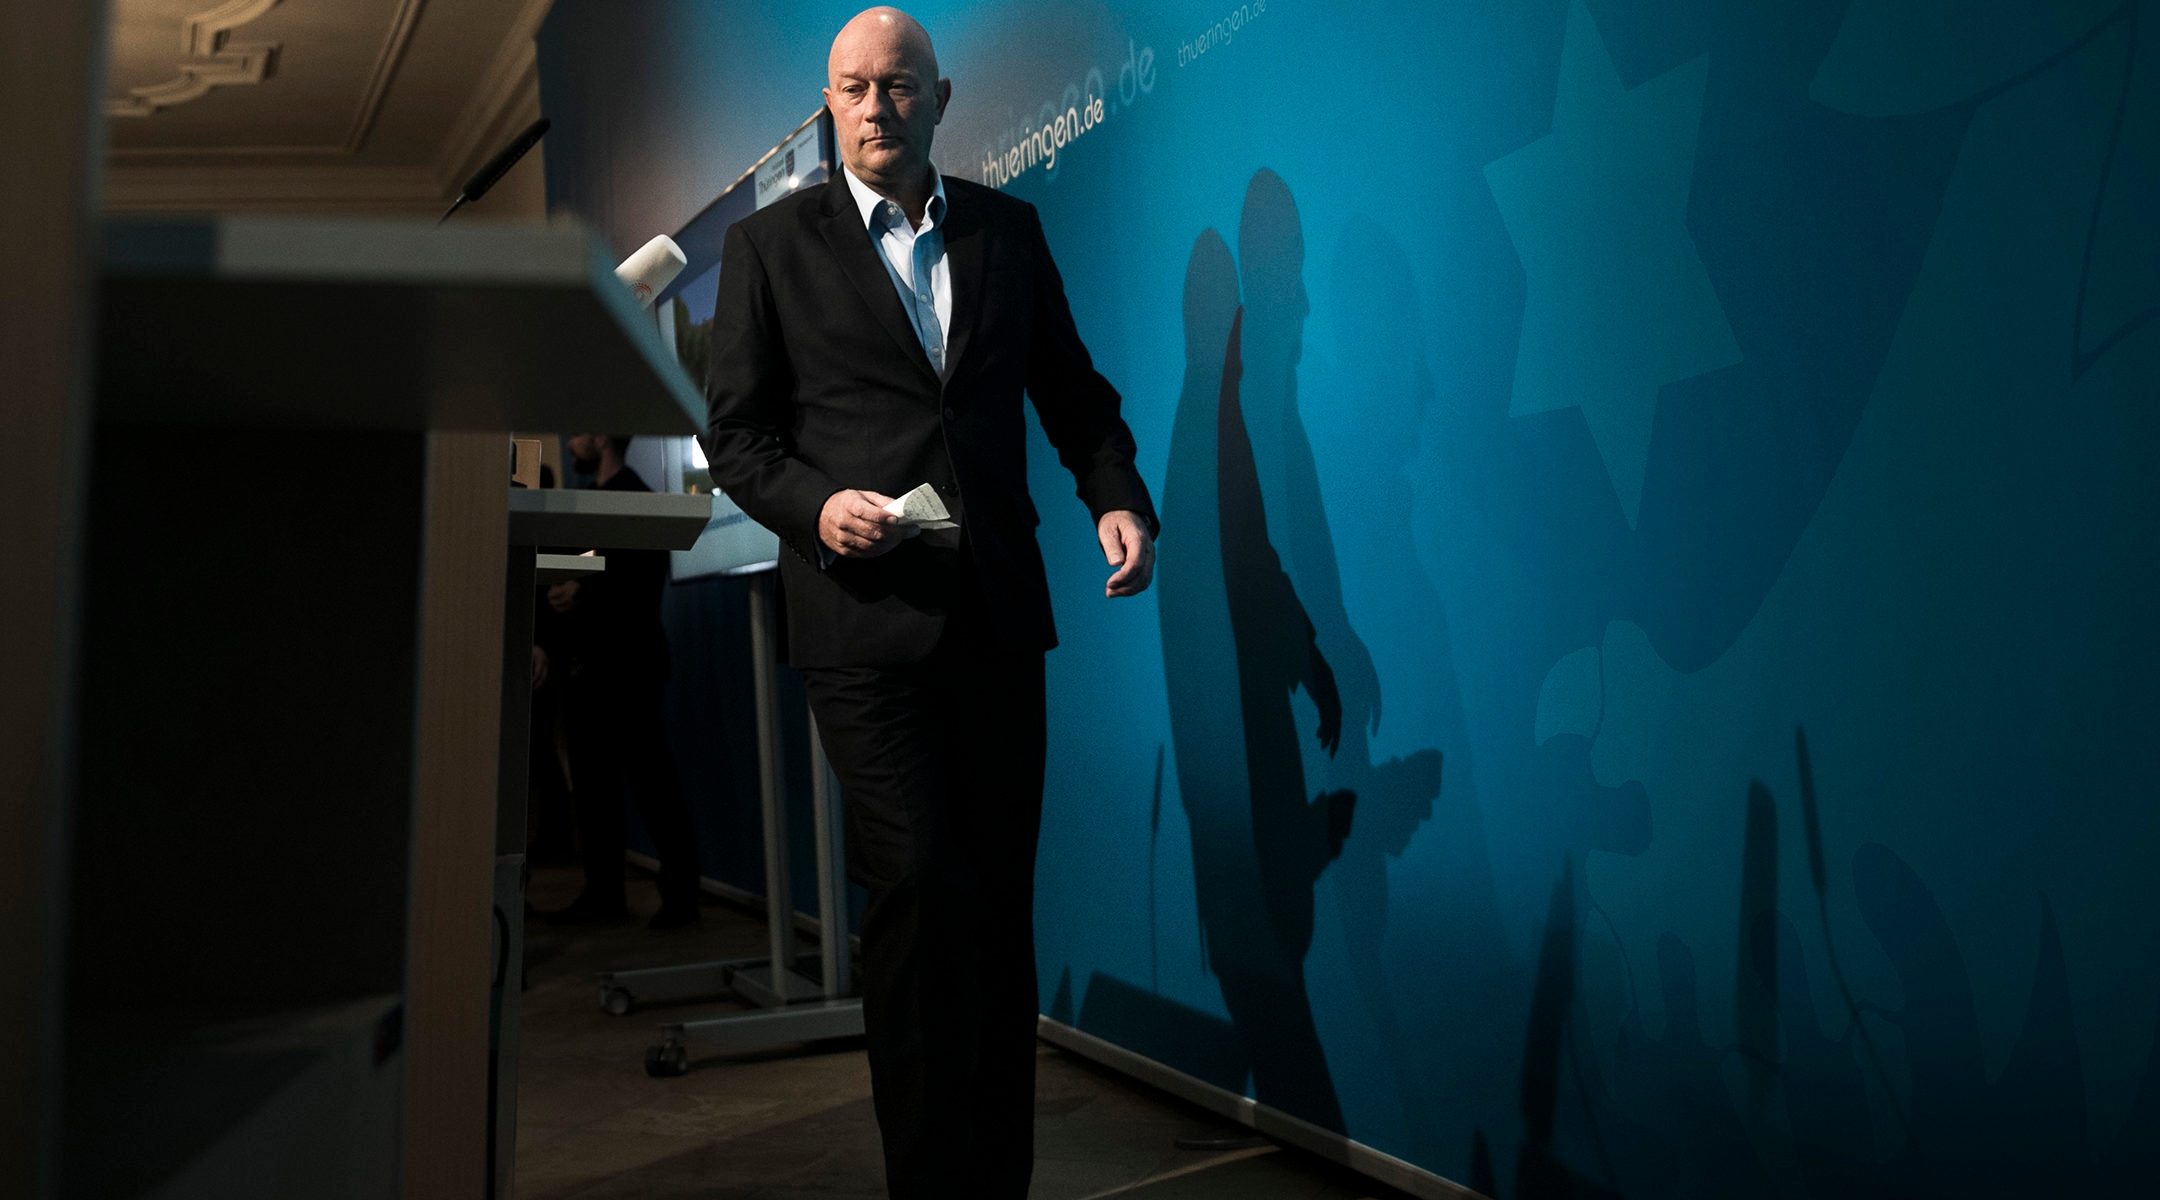 Thomas Kemmerich, who was elected governor of Thuringia but resigned the post, arriving to a press conference in Erfurt, Germany on February 6, 2020. (Carsten Koall/Getty Images)